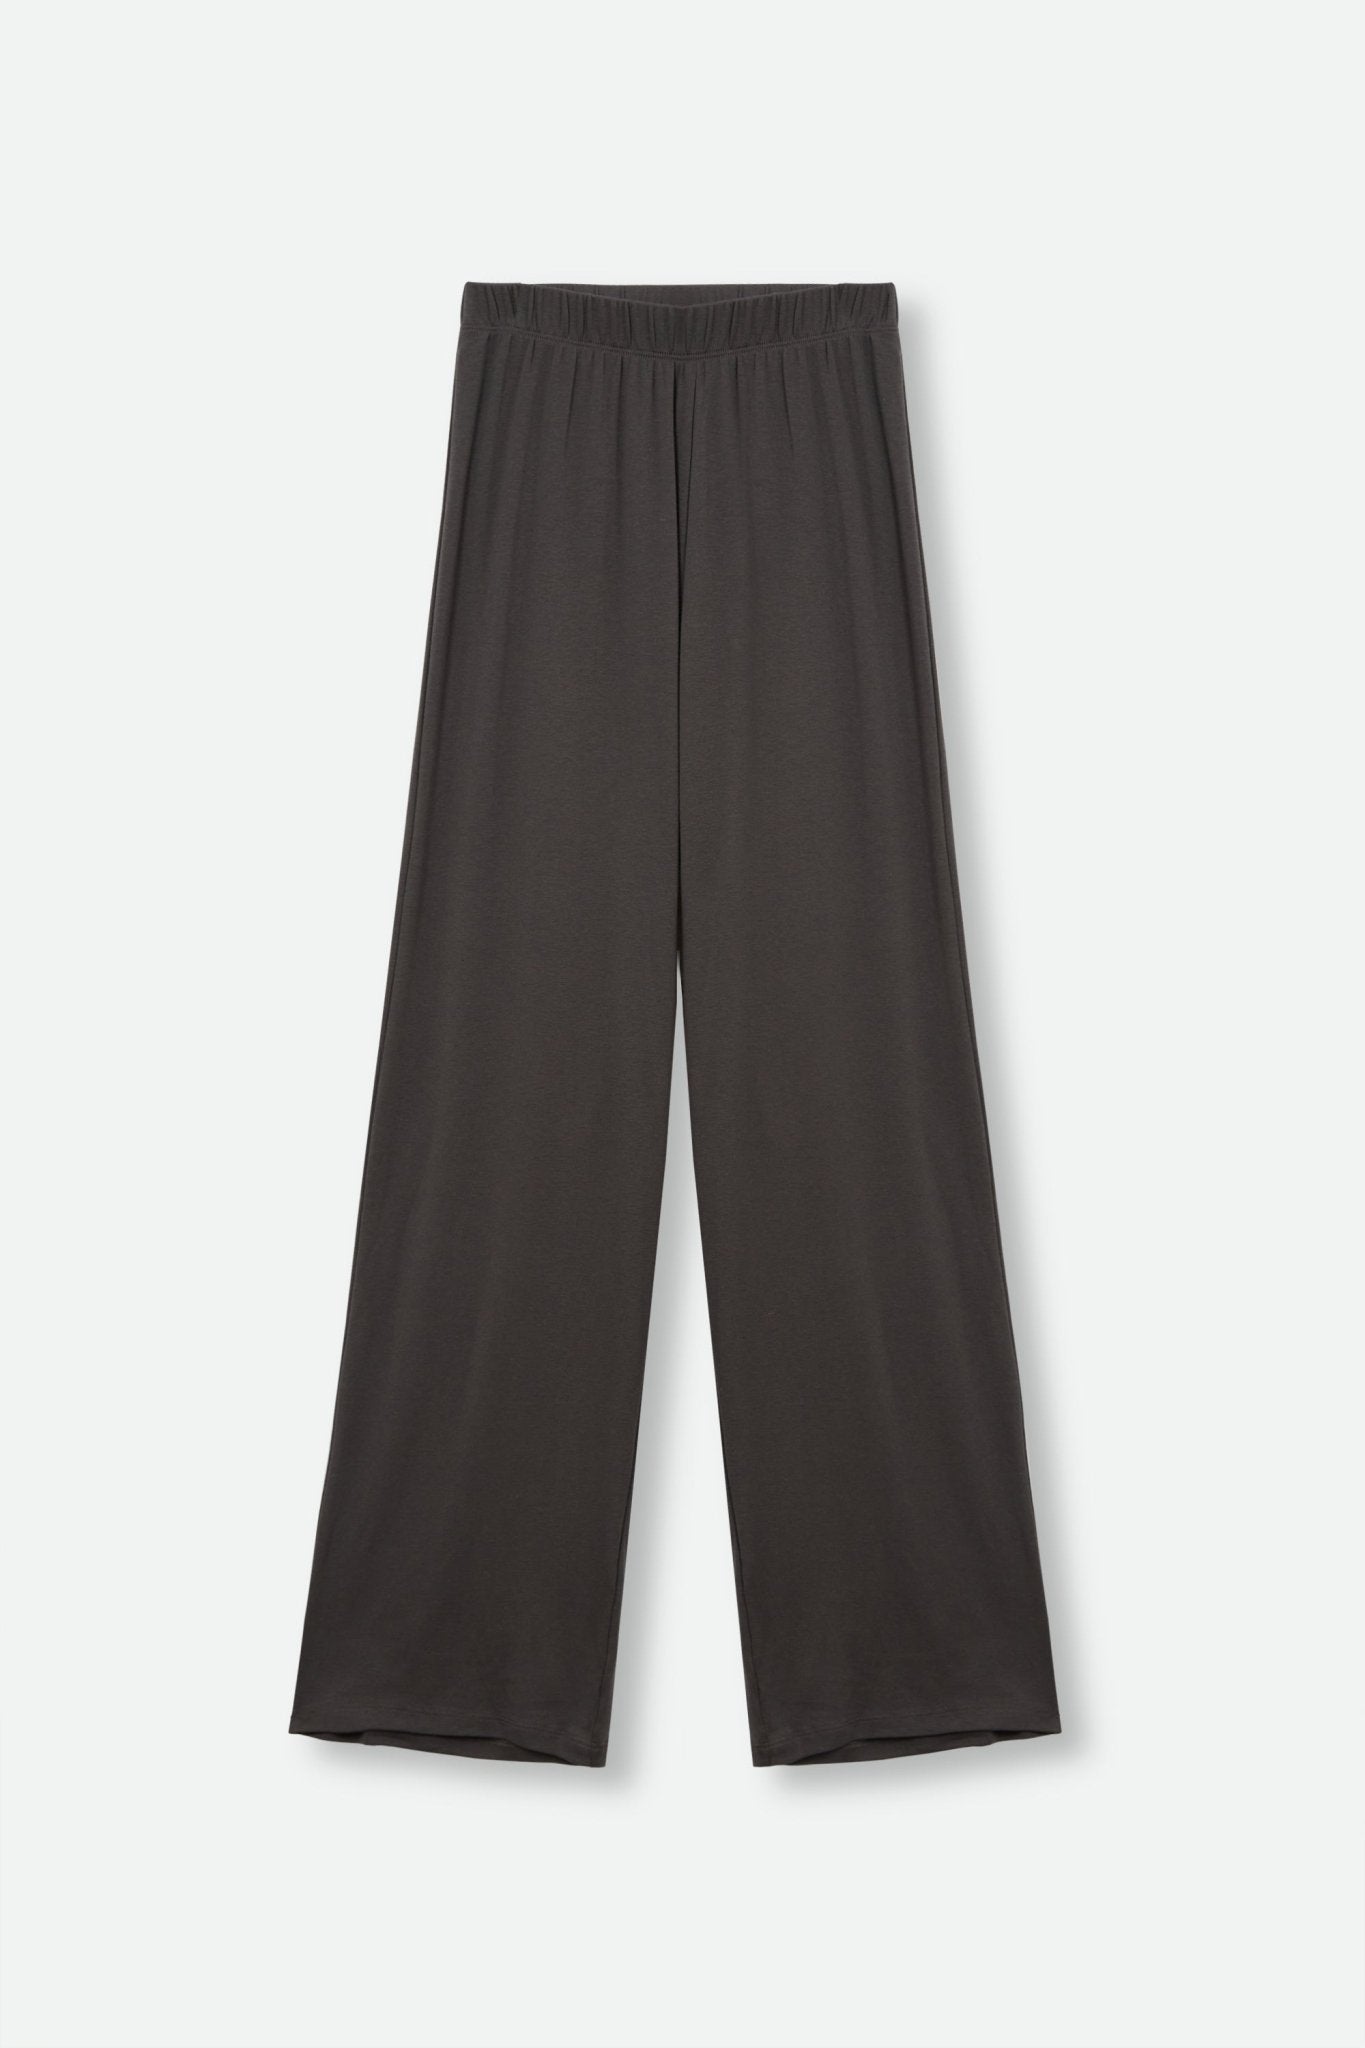 ADDY PIMA COTTON LOUNGE PANT IN CINDER GREY